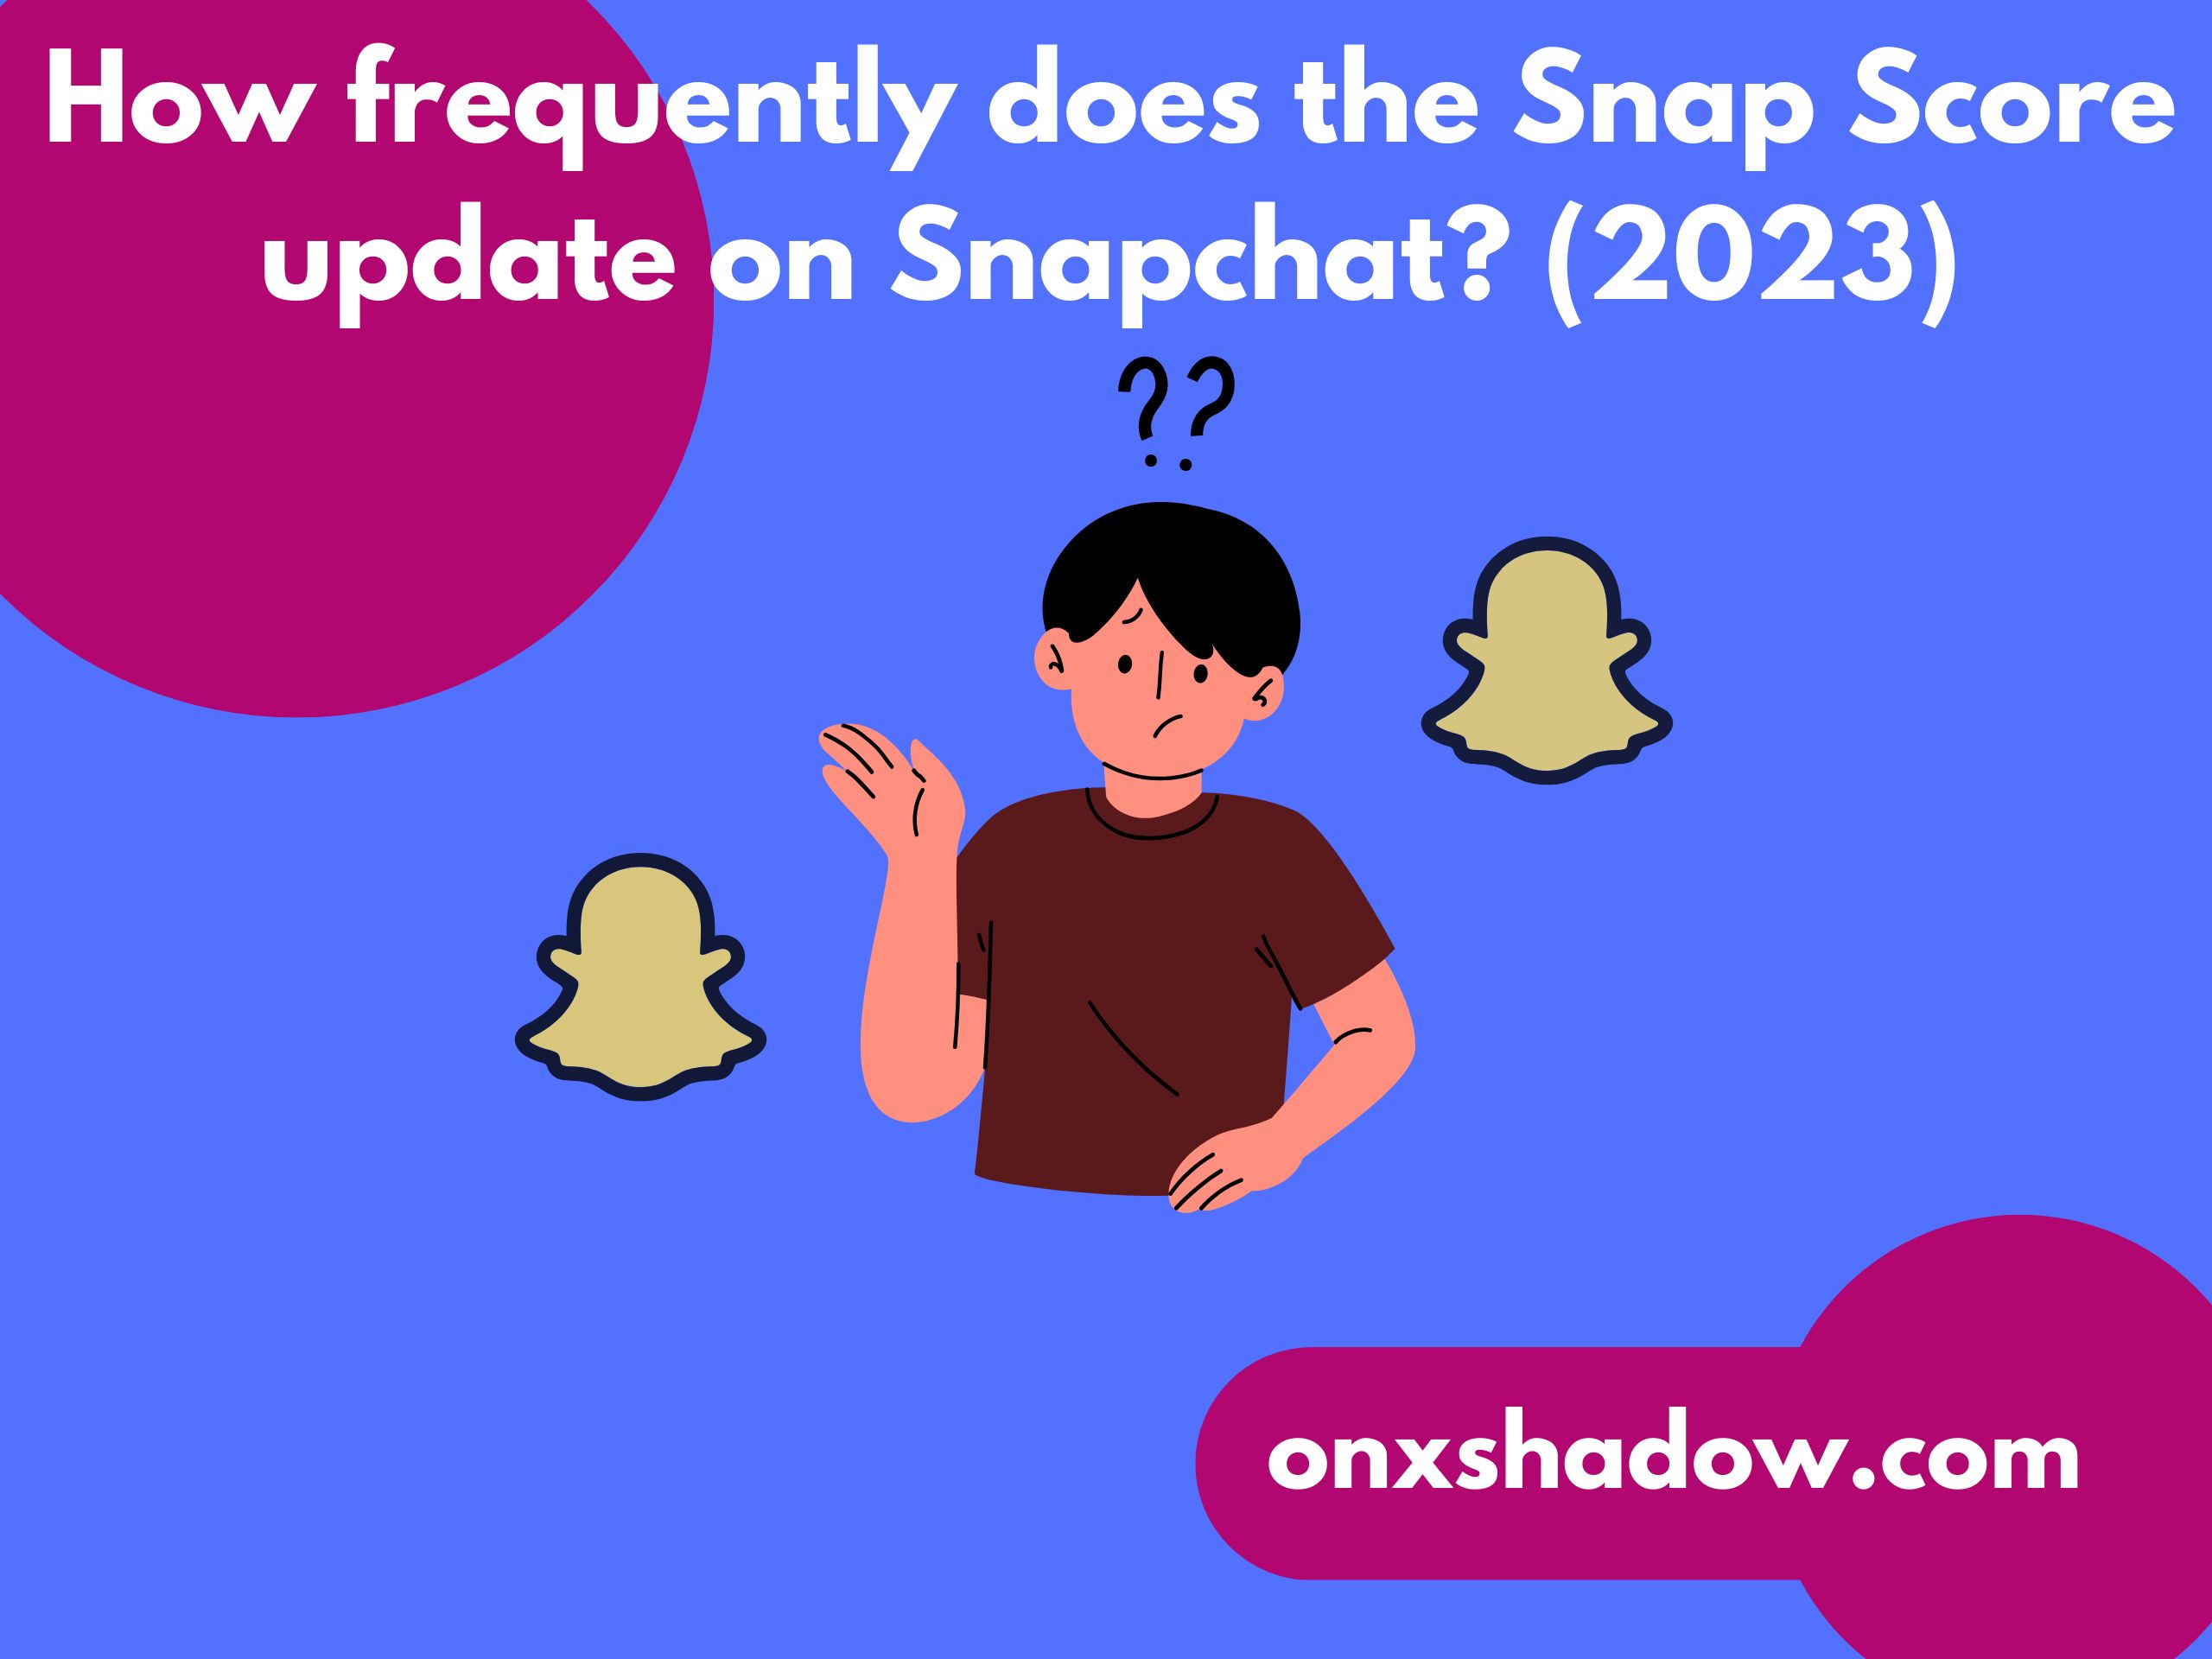 How frequently does the Snap Score update on Snapchat? (2023)